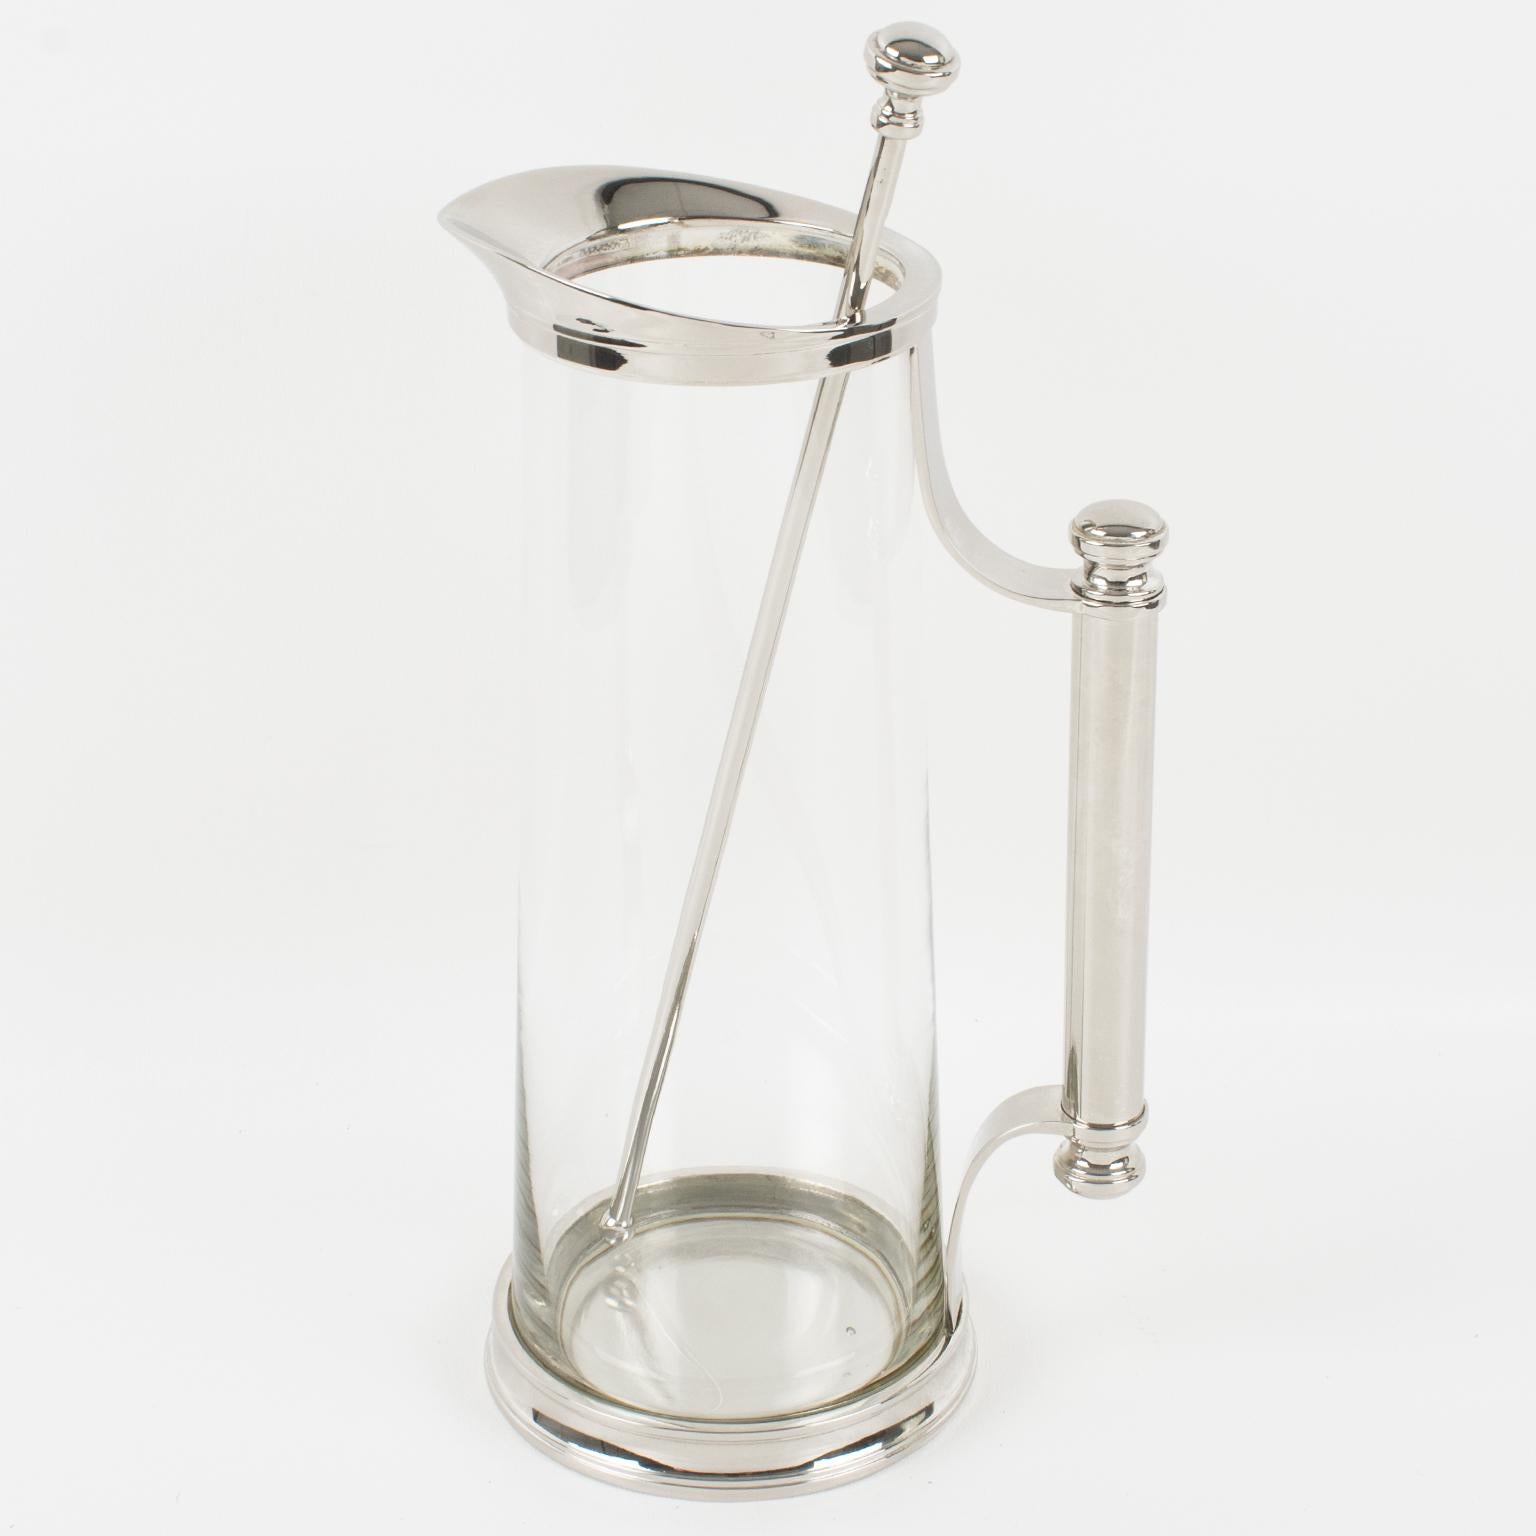 A lovely streamlined barware set designed by Godinger. Sleek and modernist design with extra tall silver plate and crystal Martini pitcher or mixer jug, and long stirrer. The crystal glass body of the martini pitcher is complemented by silver plated